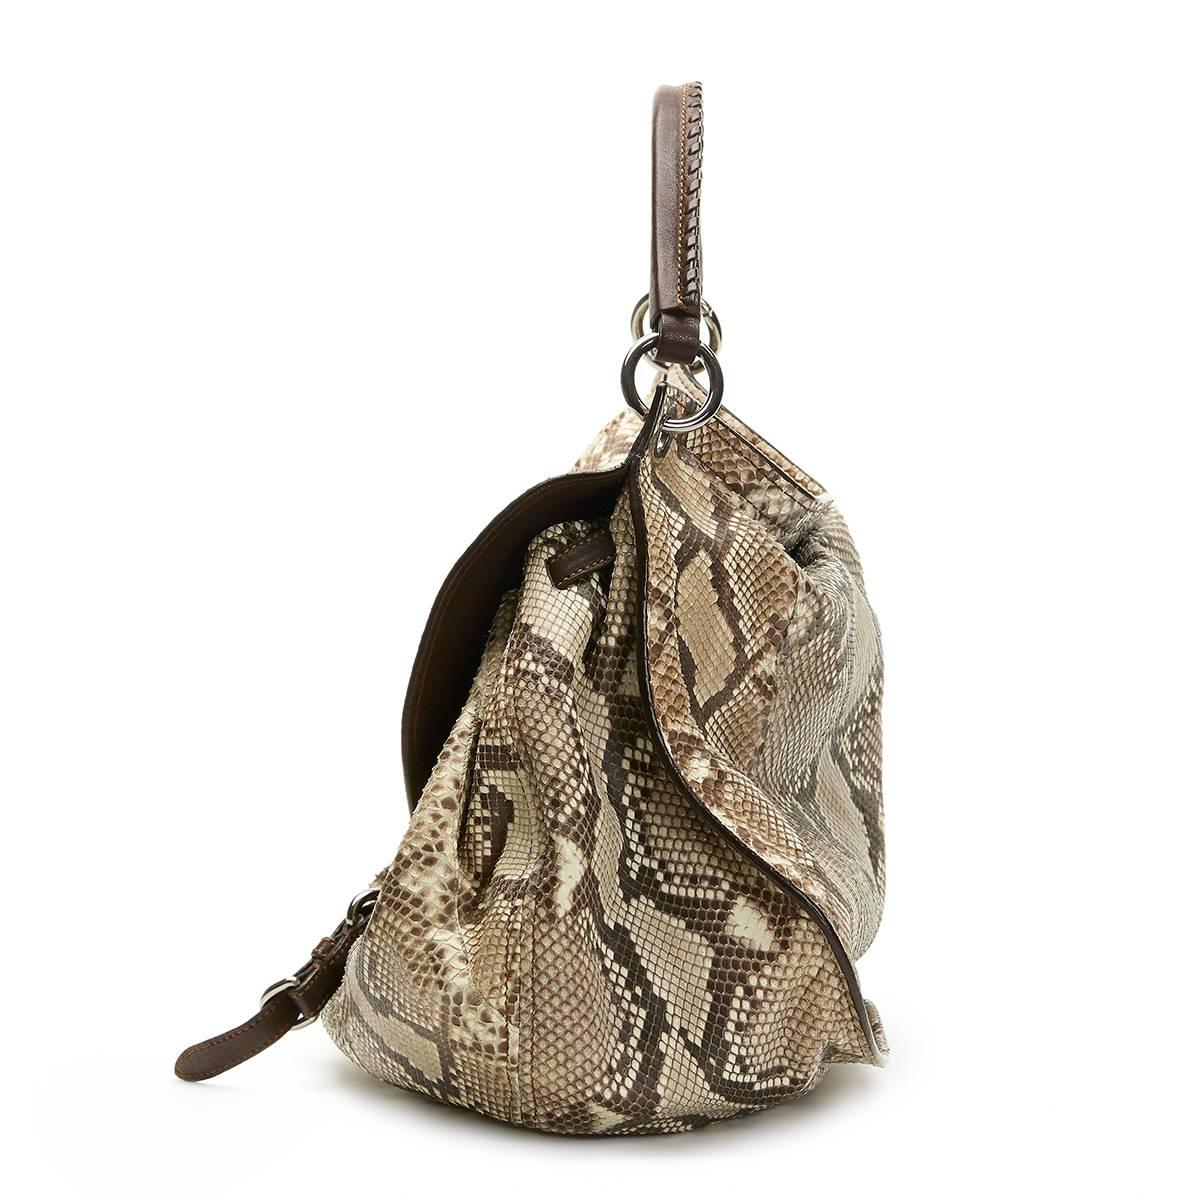 MIU MIU
Python Leather Aviator Hobo Bag

Reference: CB114
Serial Number: 37
Age (Circa): 2011
Accompanied By: Miu Miu Dust Bag, Care Card, Shoulder Strap
Authenticity Details: Serial Tag (Made in Italy)
Gender: Ladies
Type: Shoulder, Tote,